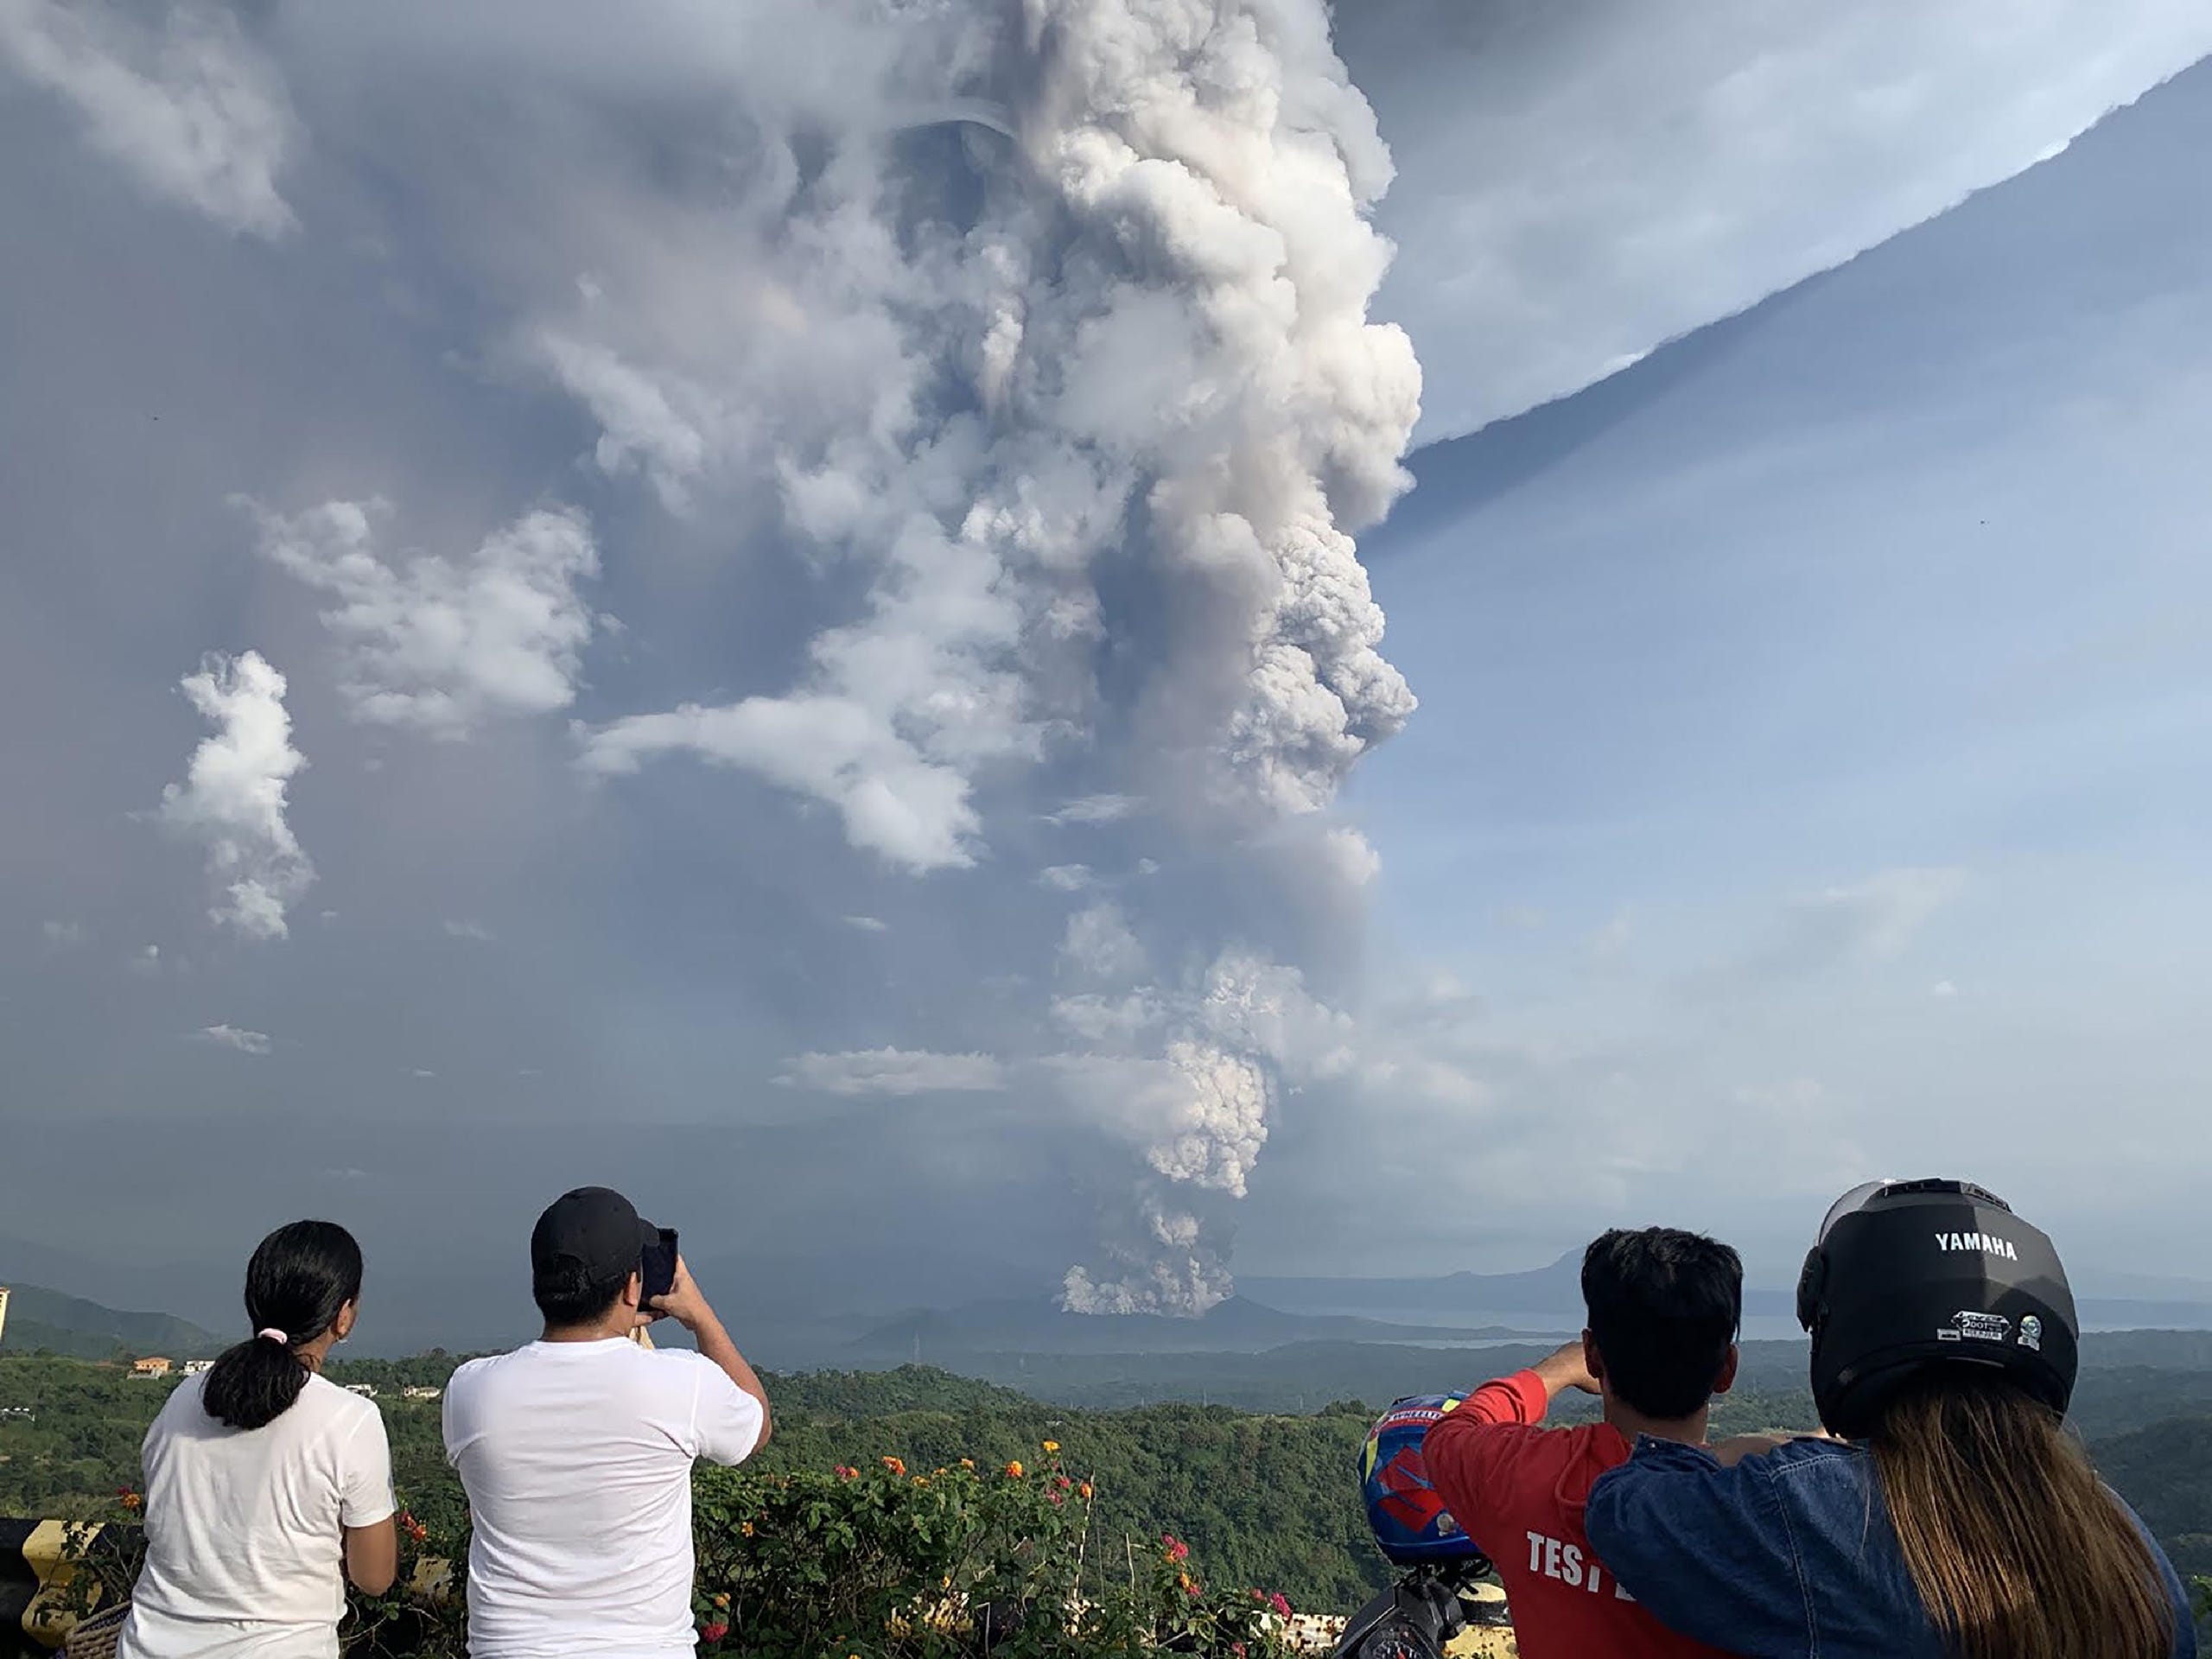 302 quakes detected in Taal Volcano